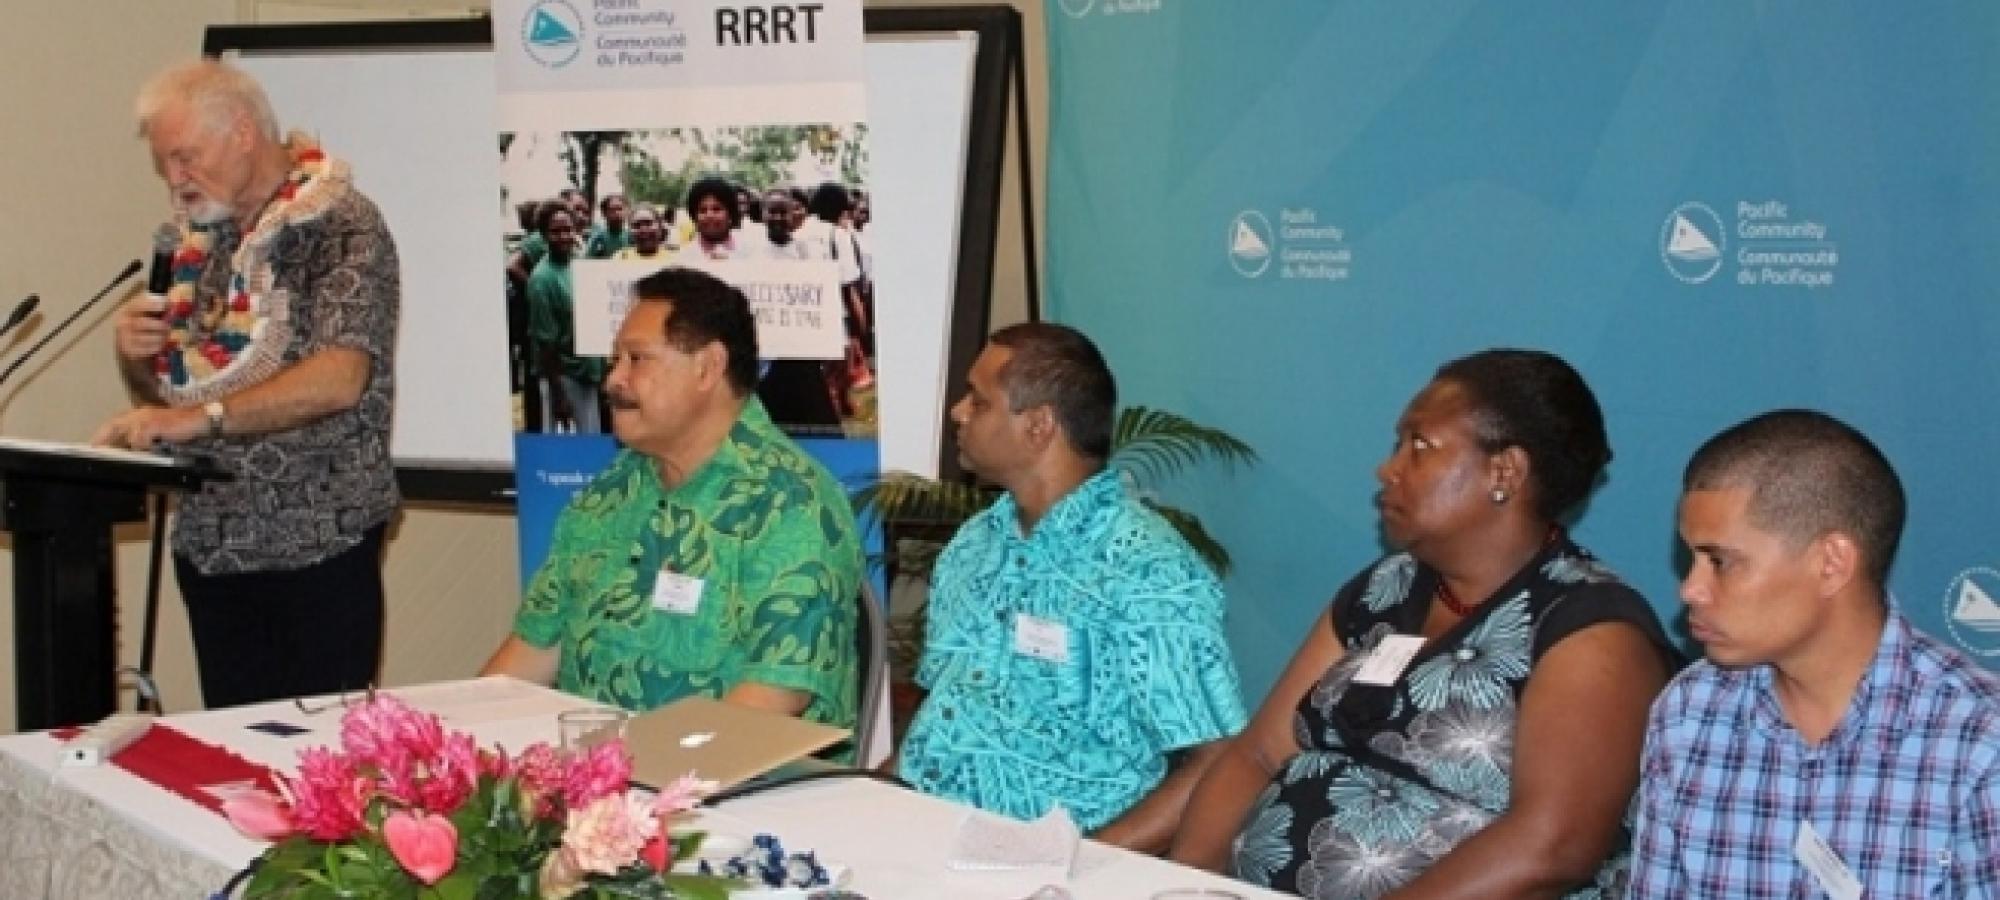 ‘Pacific media ought to bear witness to human rights violations’ – David Robie